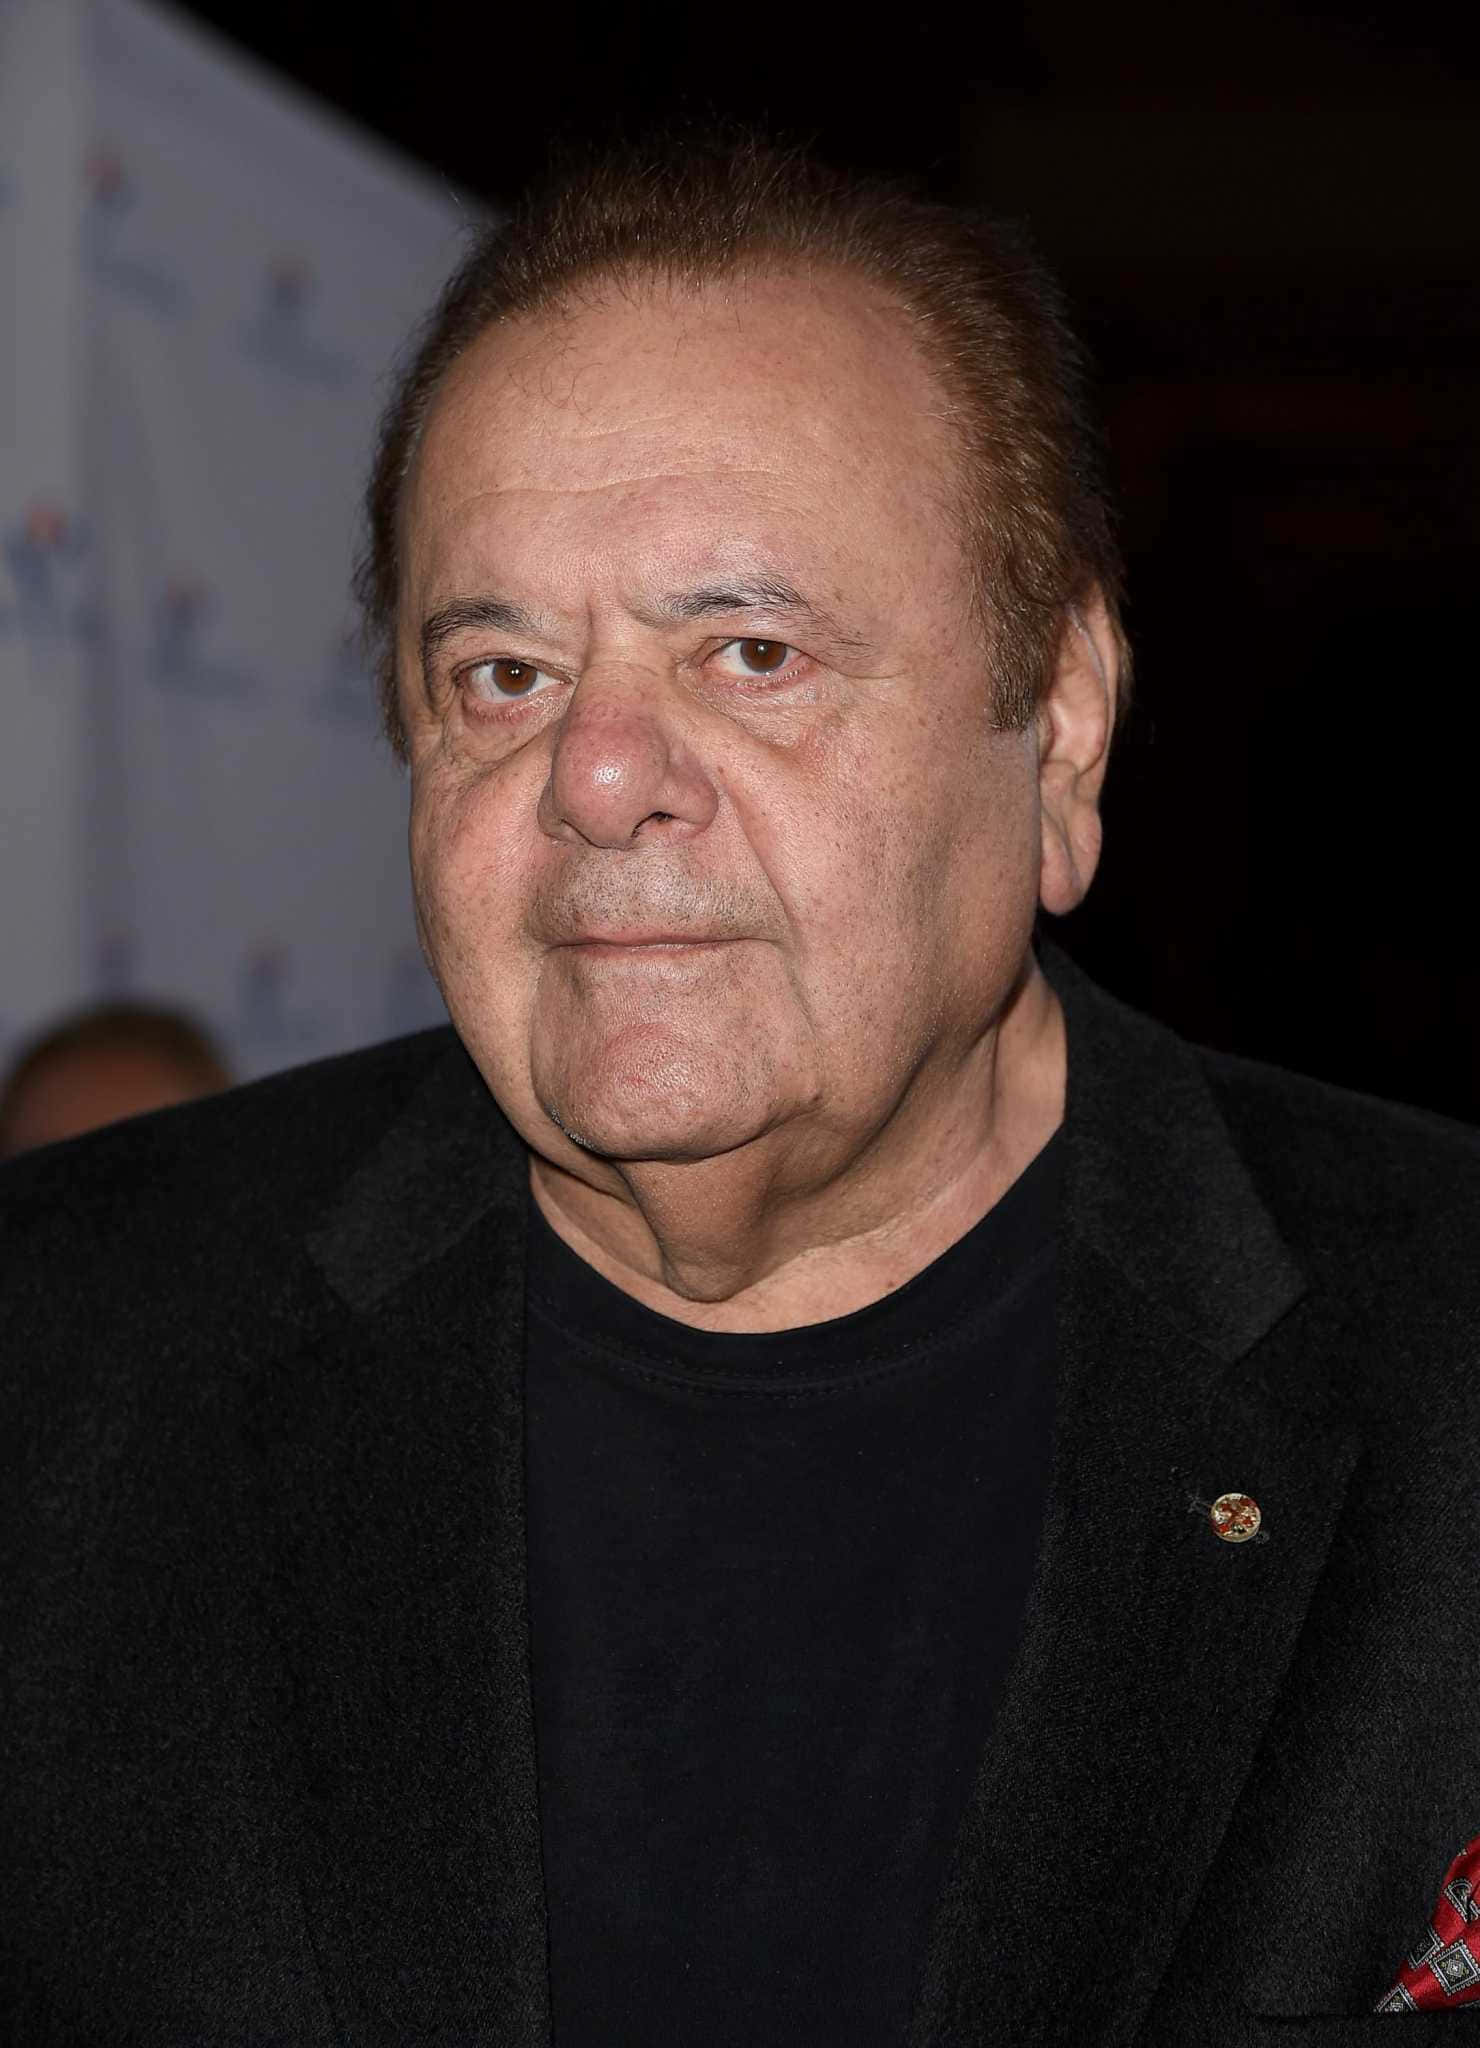 Actor Paul Sorvino Is Known For His Roles In Movies Such As 